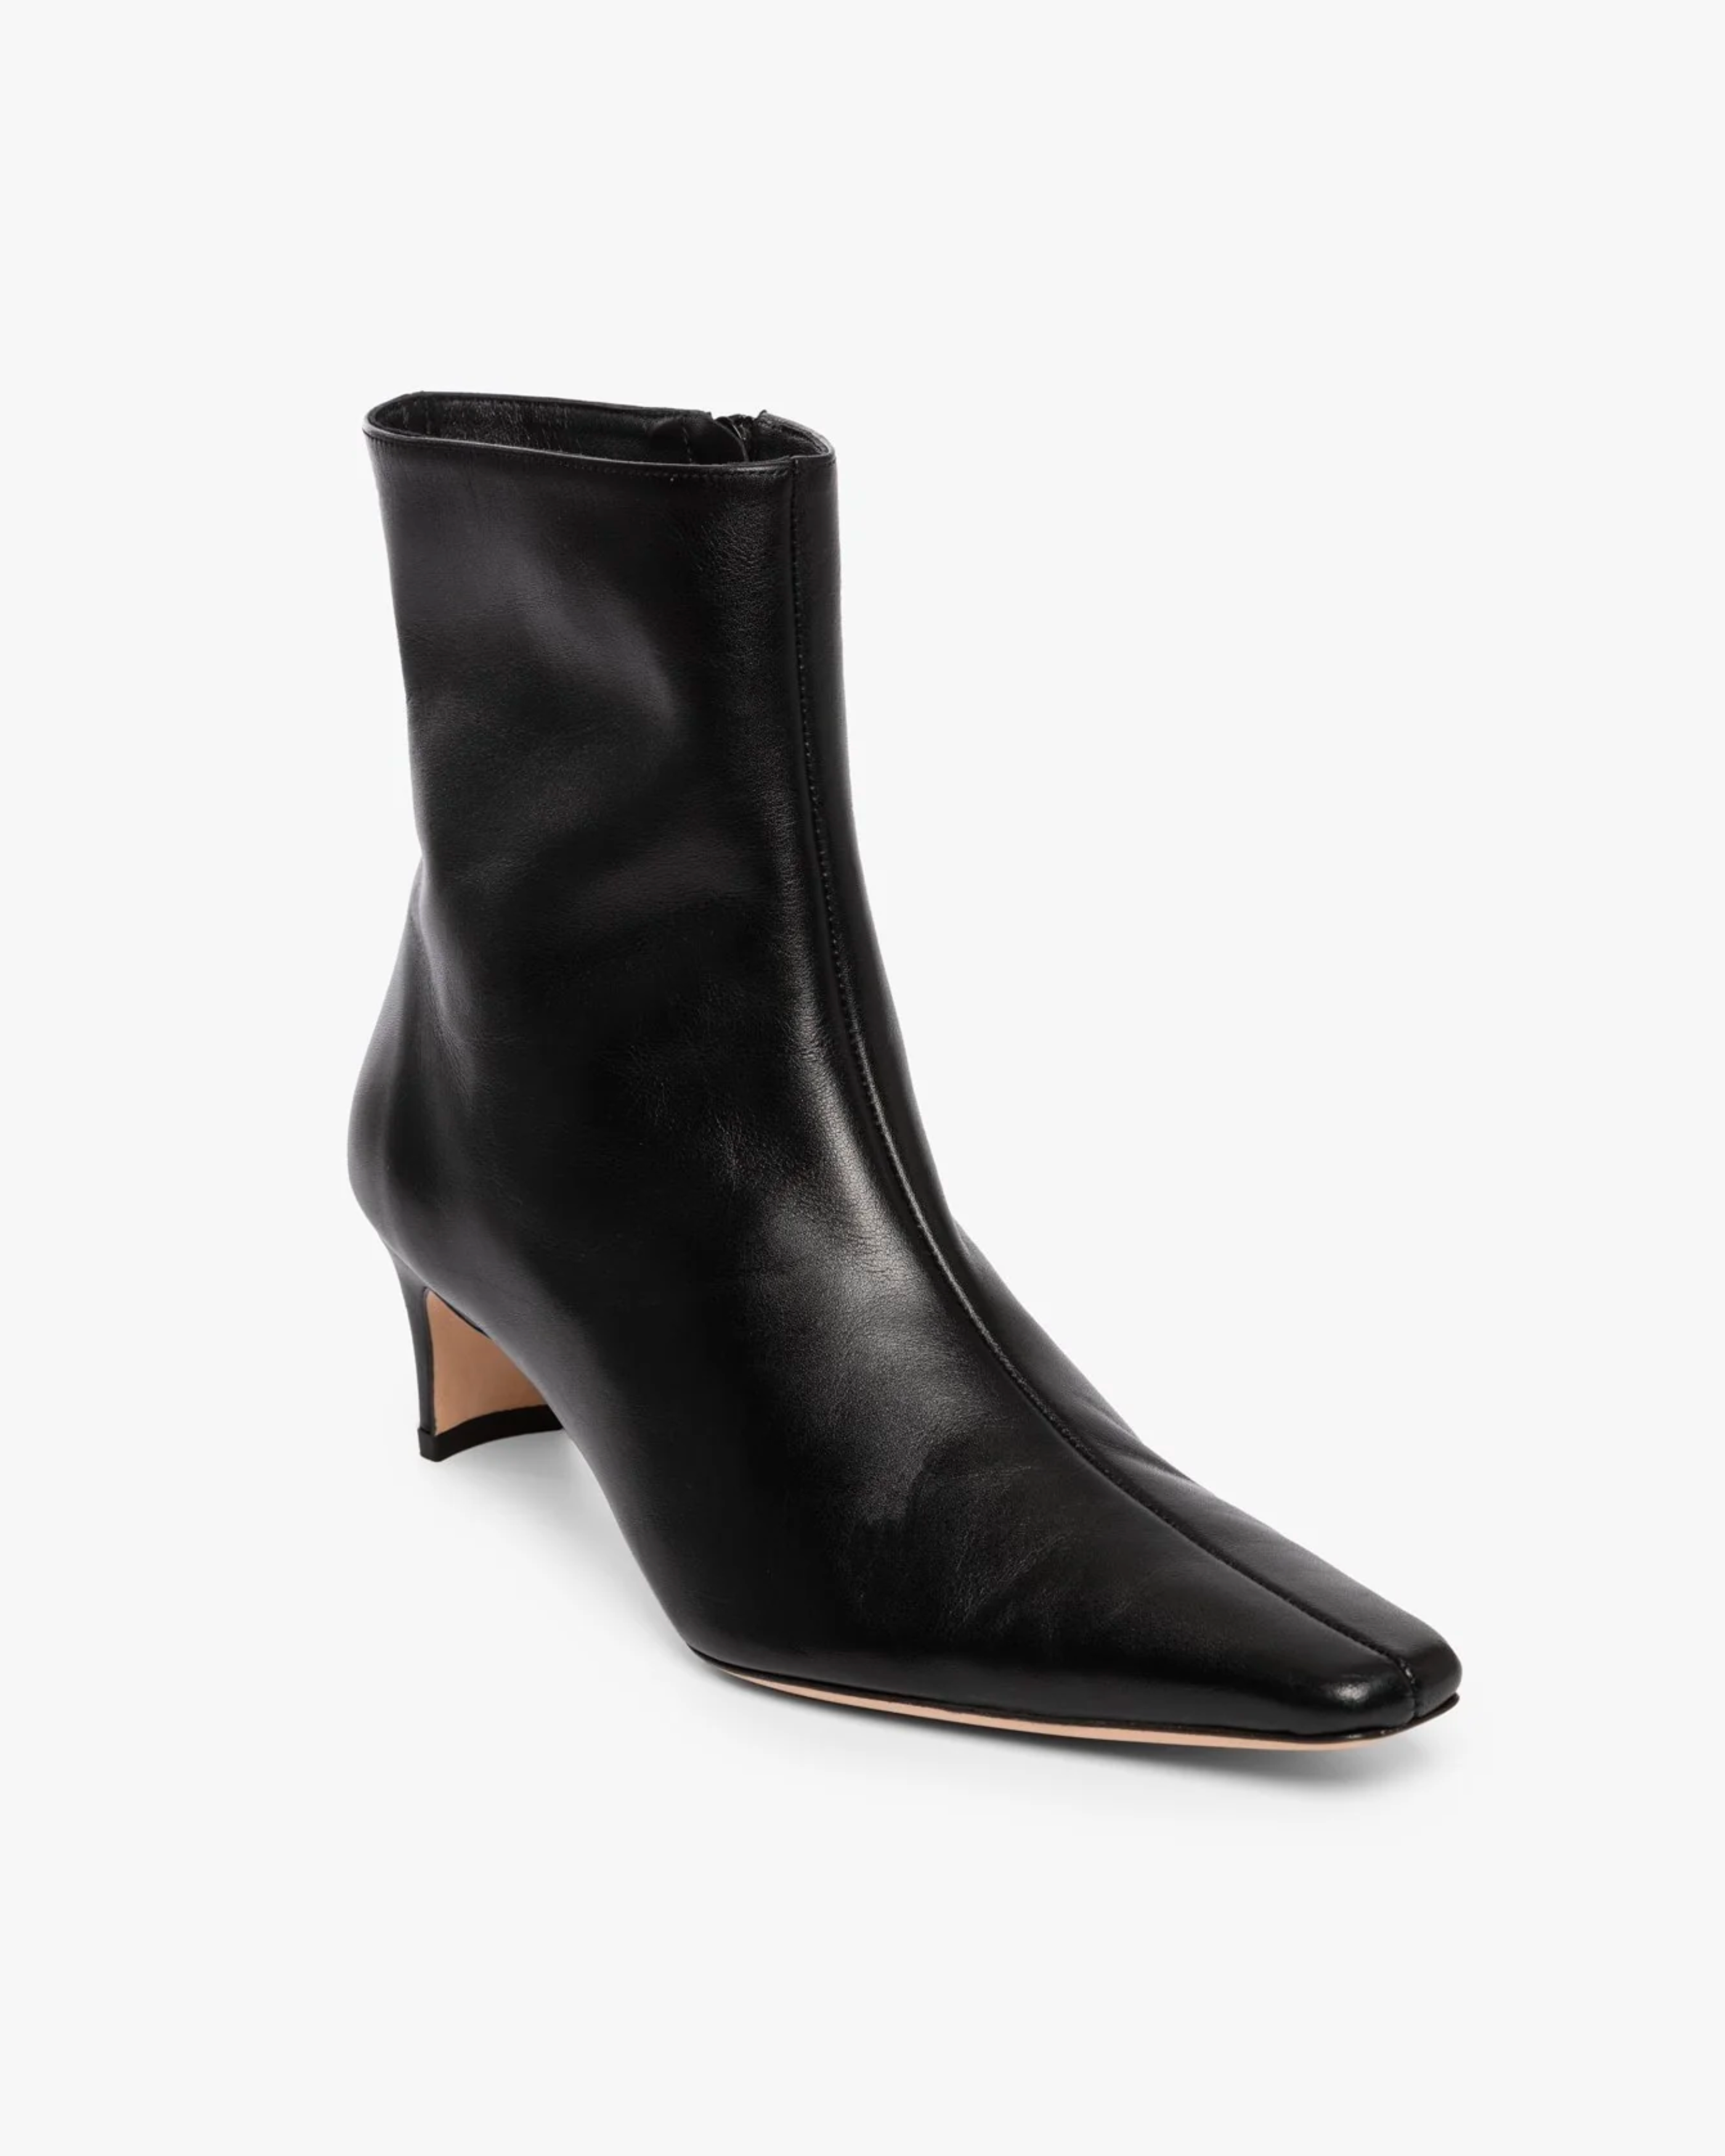 Staud Wally Ankle Boot in Black